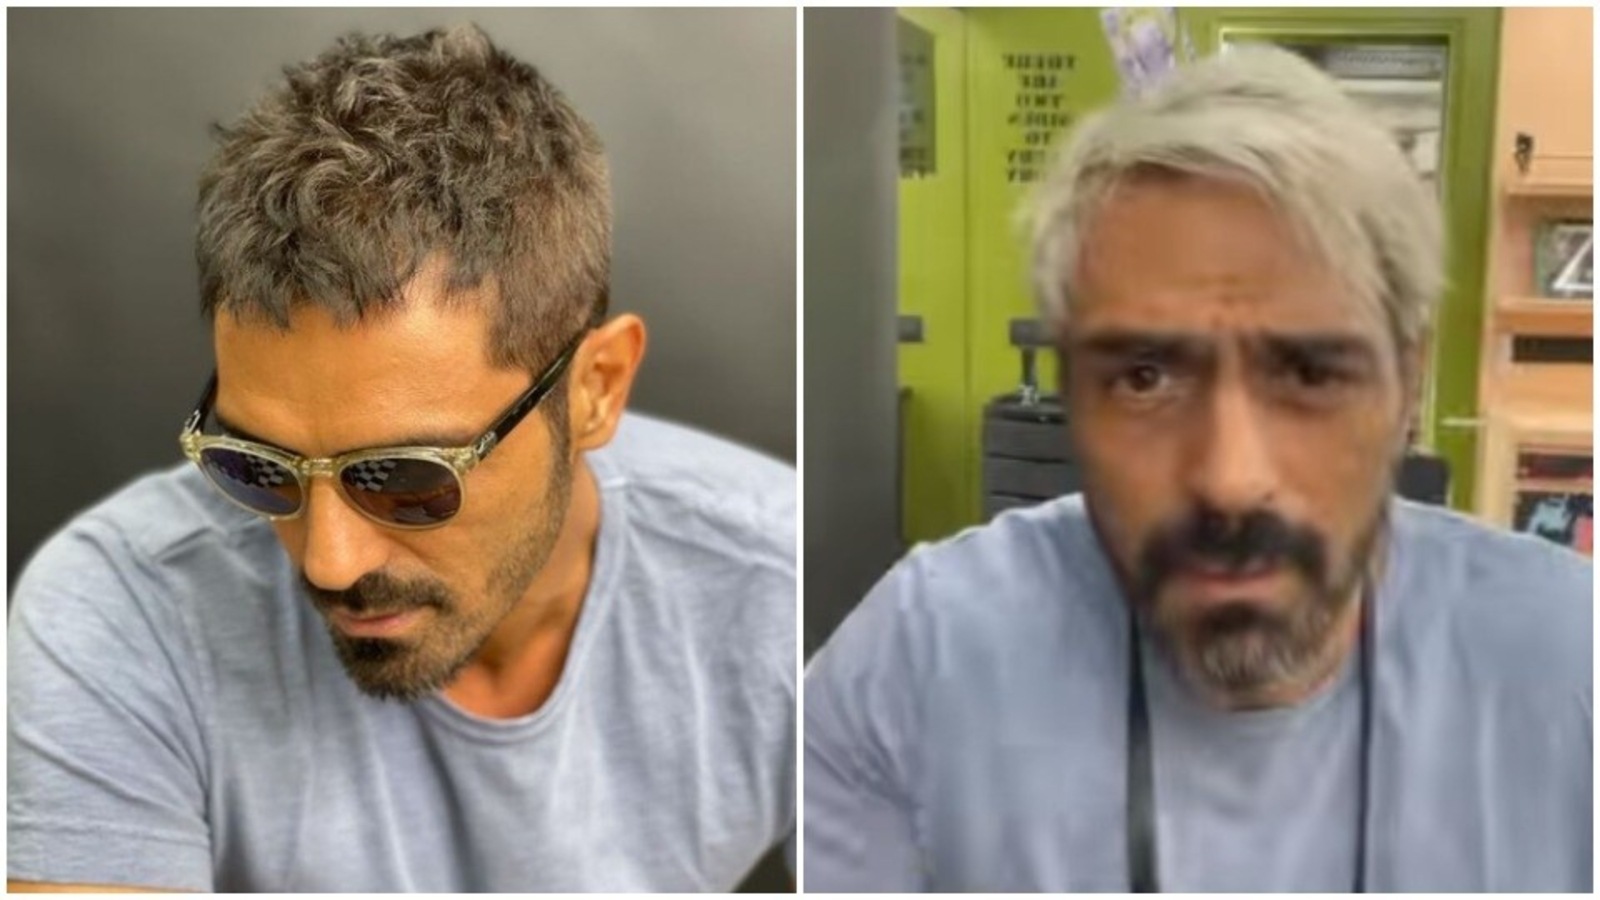 Arjun Rampal shares new hairdo pics as he goes 'back to black', bids adieu  to blonde hair. See here | Bollywood - Hindustan Times